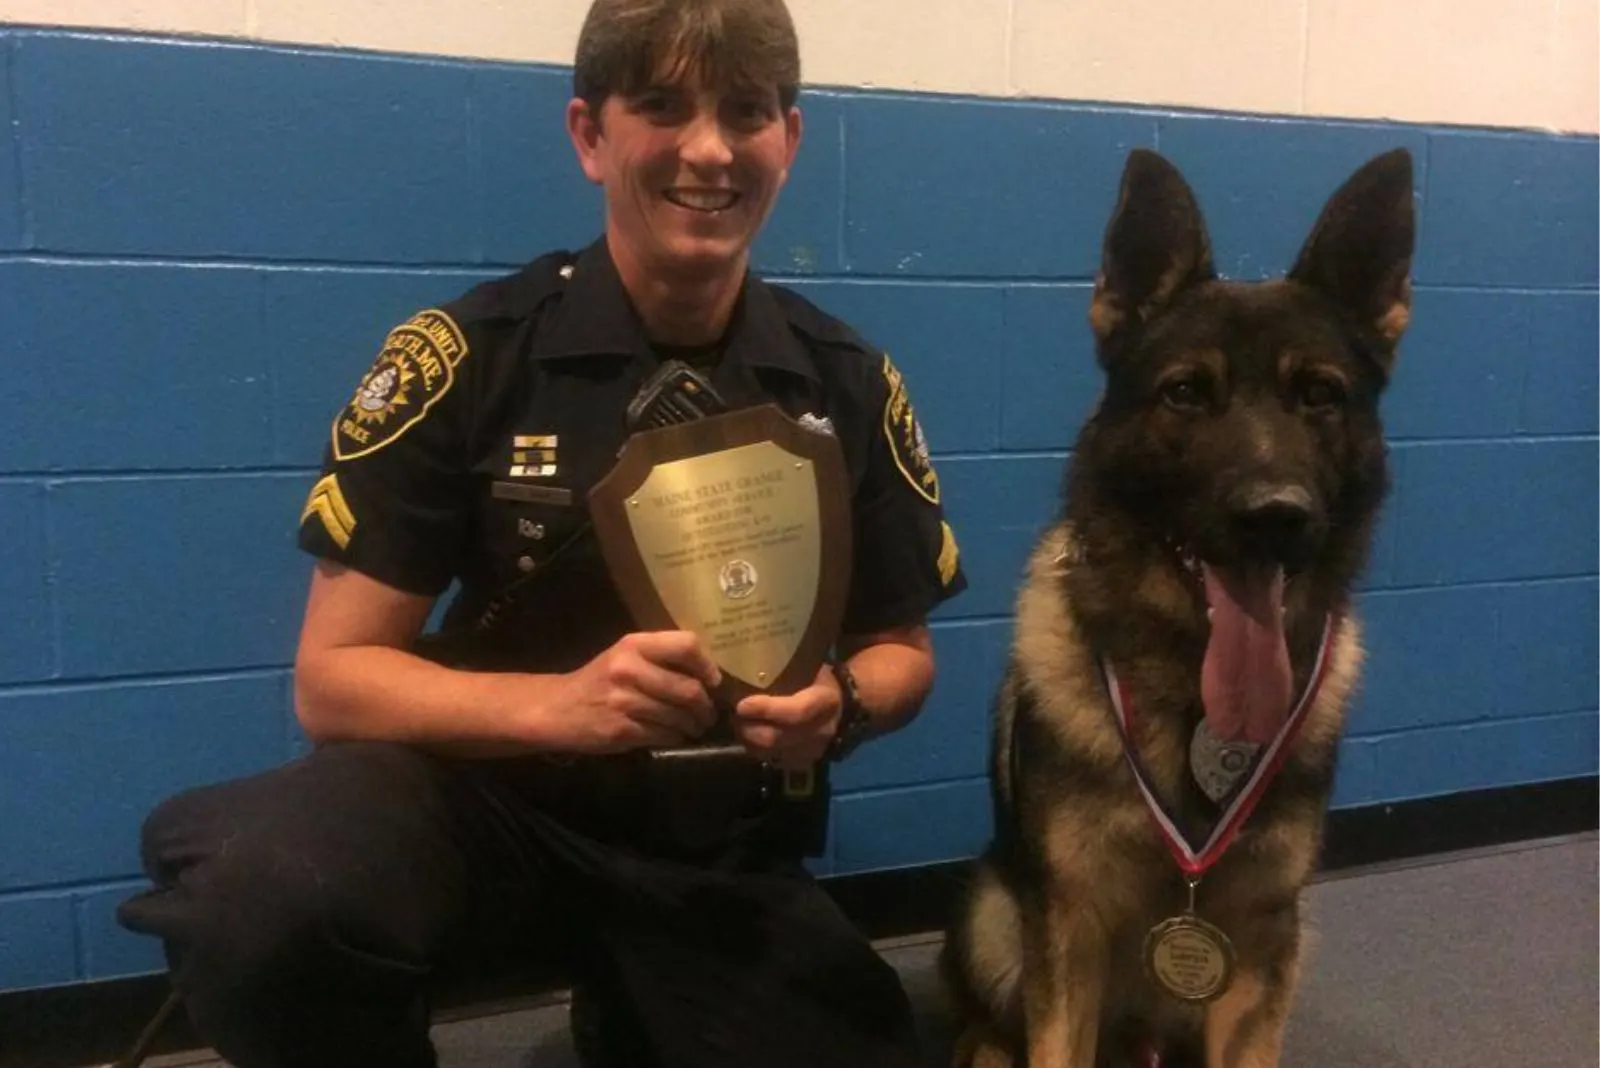 police officer and german shepherd dog with their medals